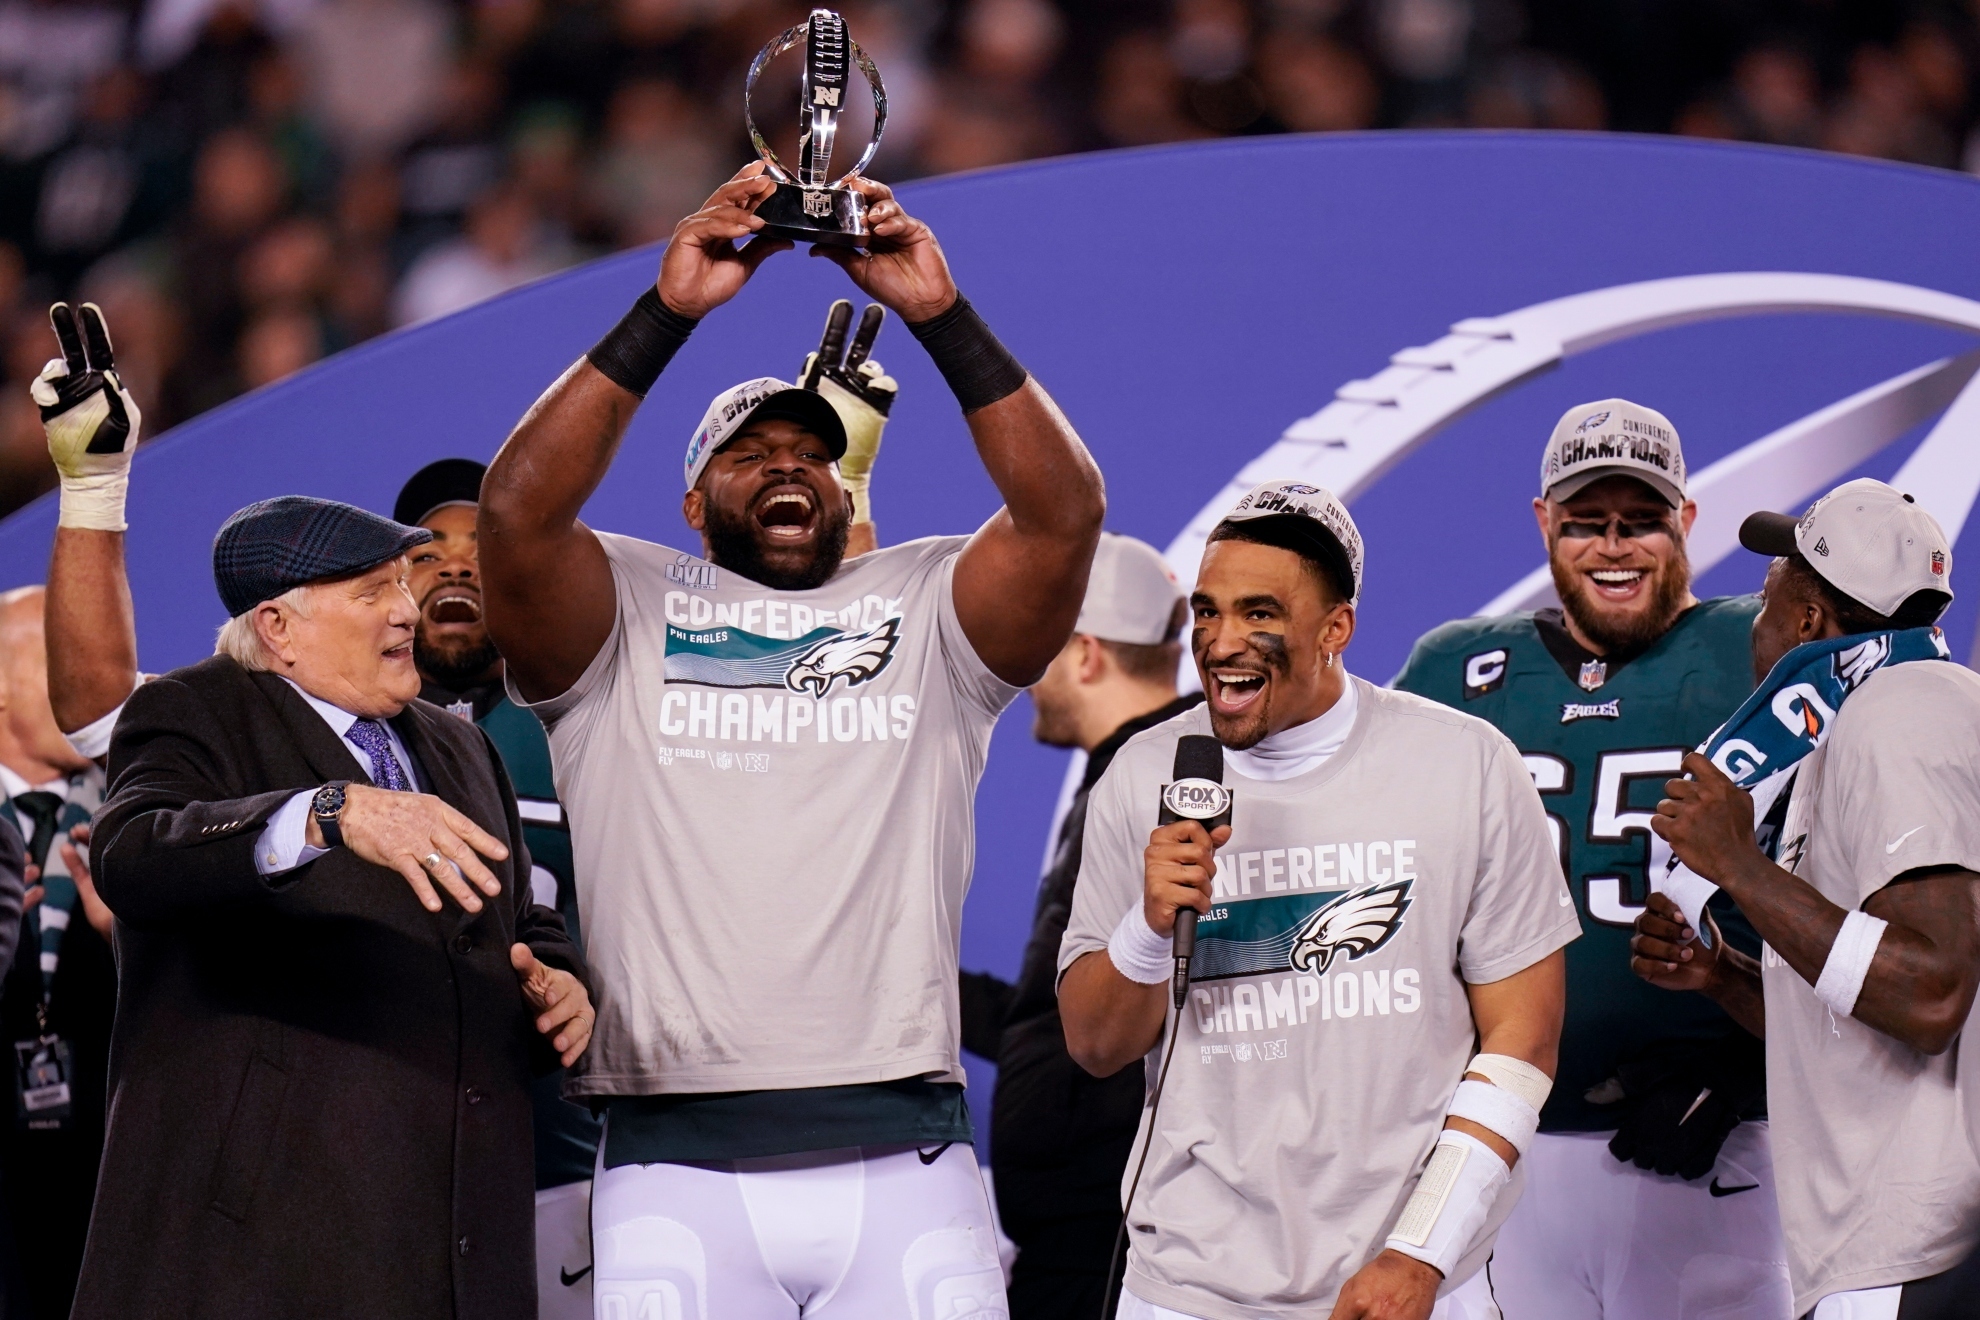 Eagles win NFC Championship and are going to Super Bowl LVII